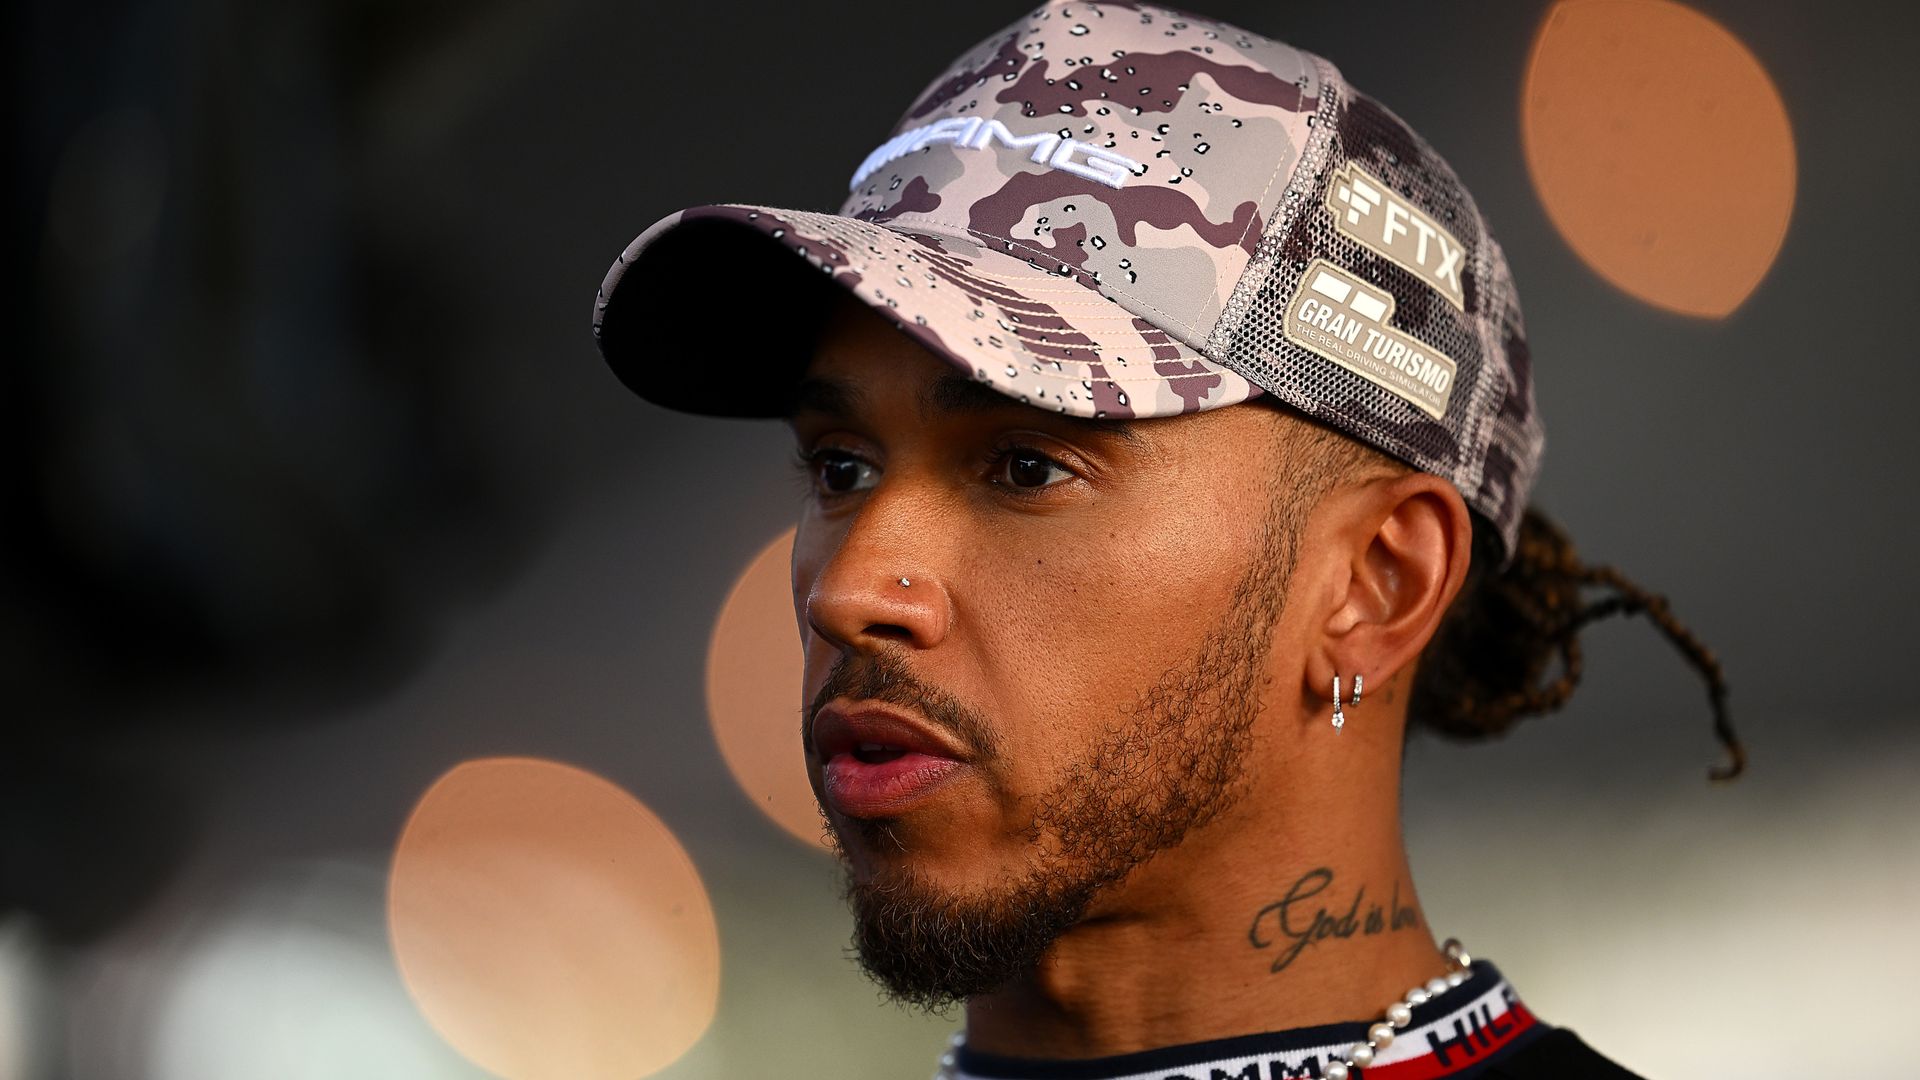 Hamilton downbeat after Merc upgrade | 'I was expecting a lot more'